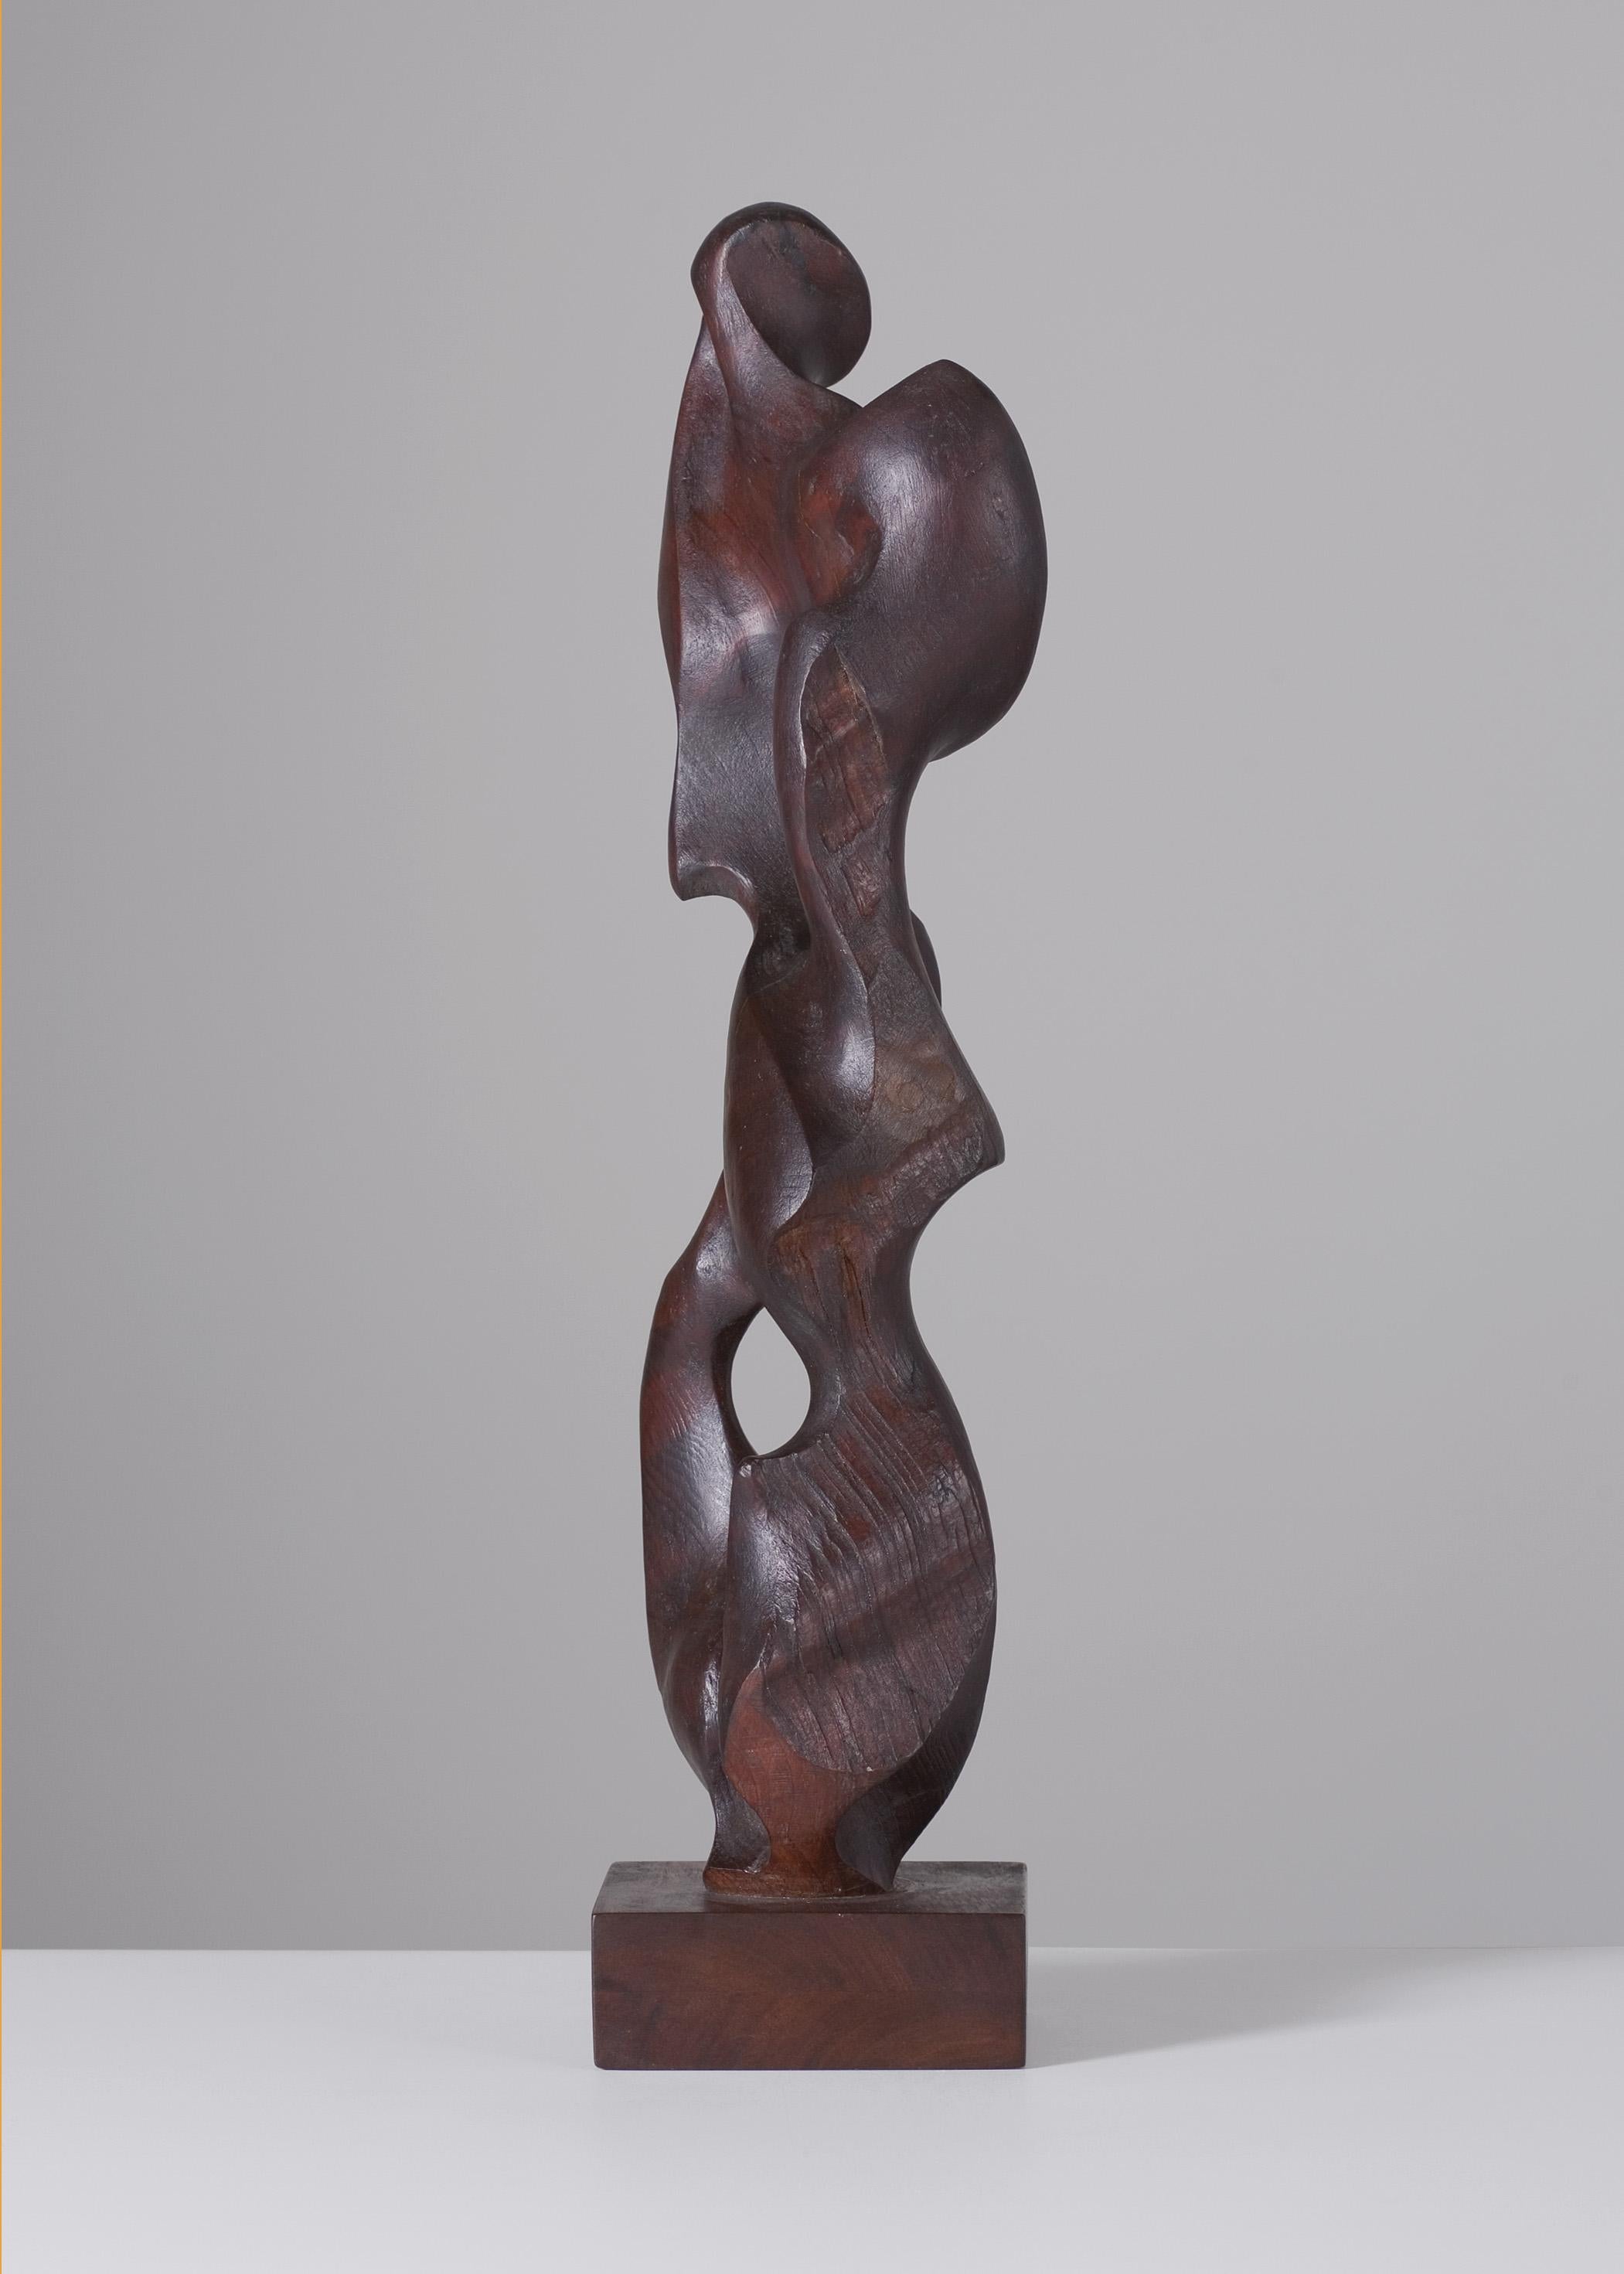 Carved Mario Dal Fabbro, Wood Sculpture, United States, 1983 For Sale